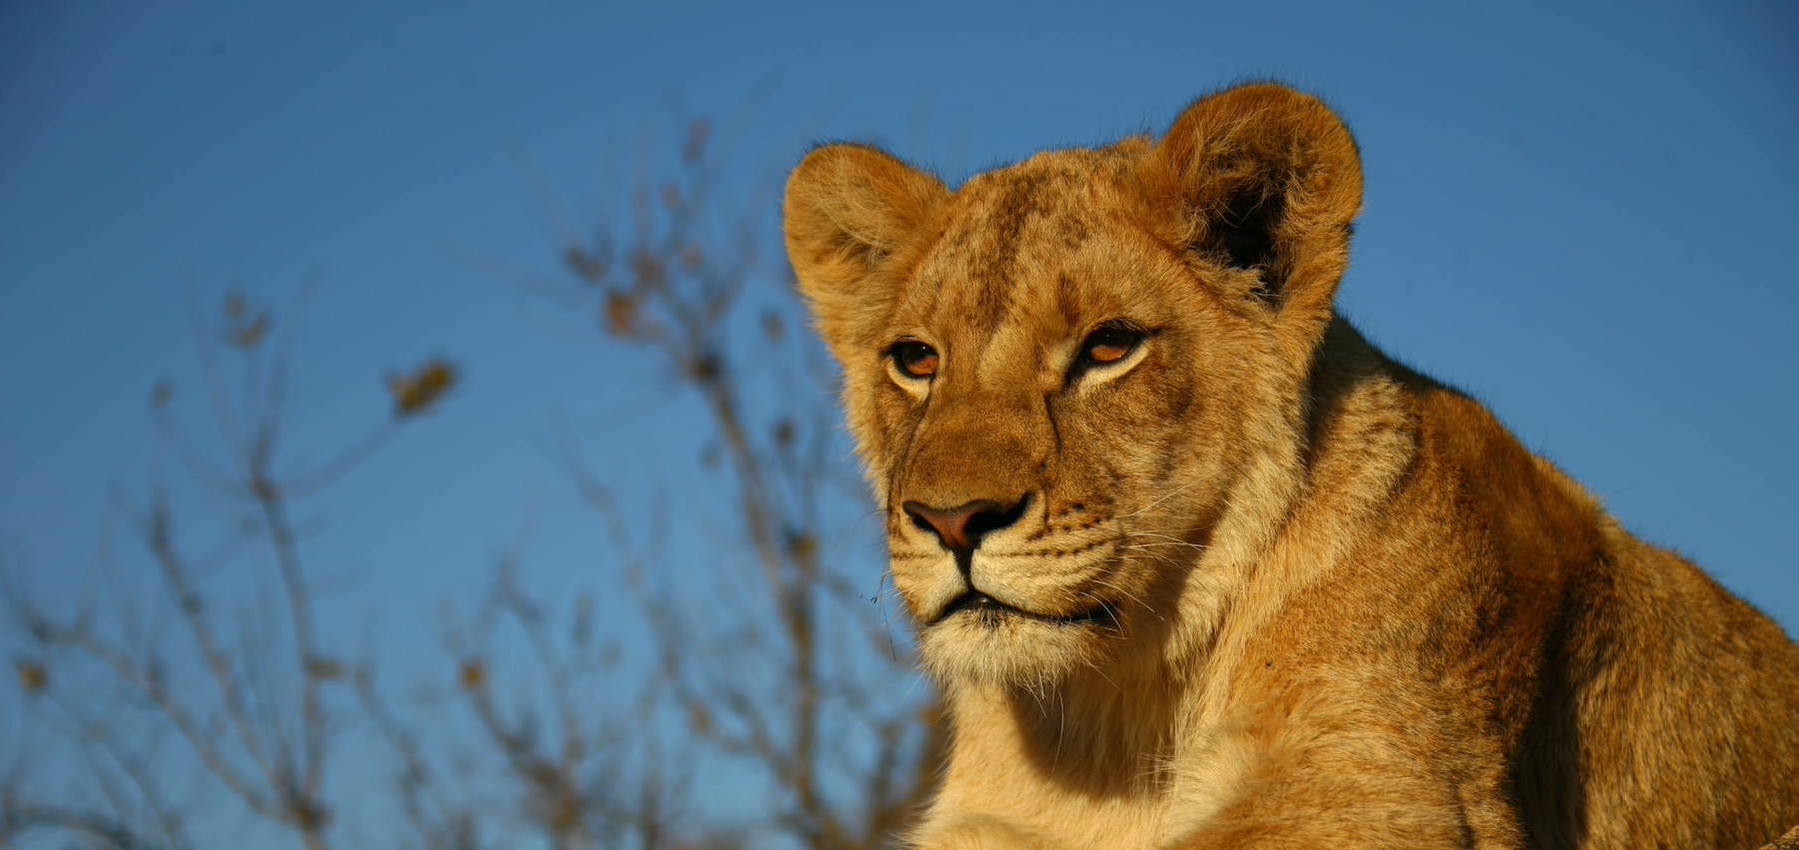 African Lion - A Vulnerable and Endangered Species